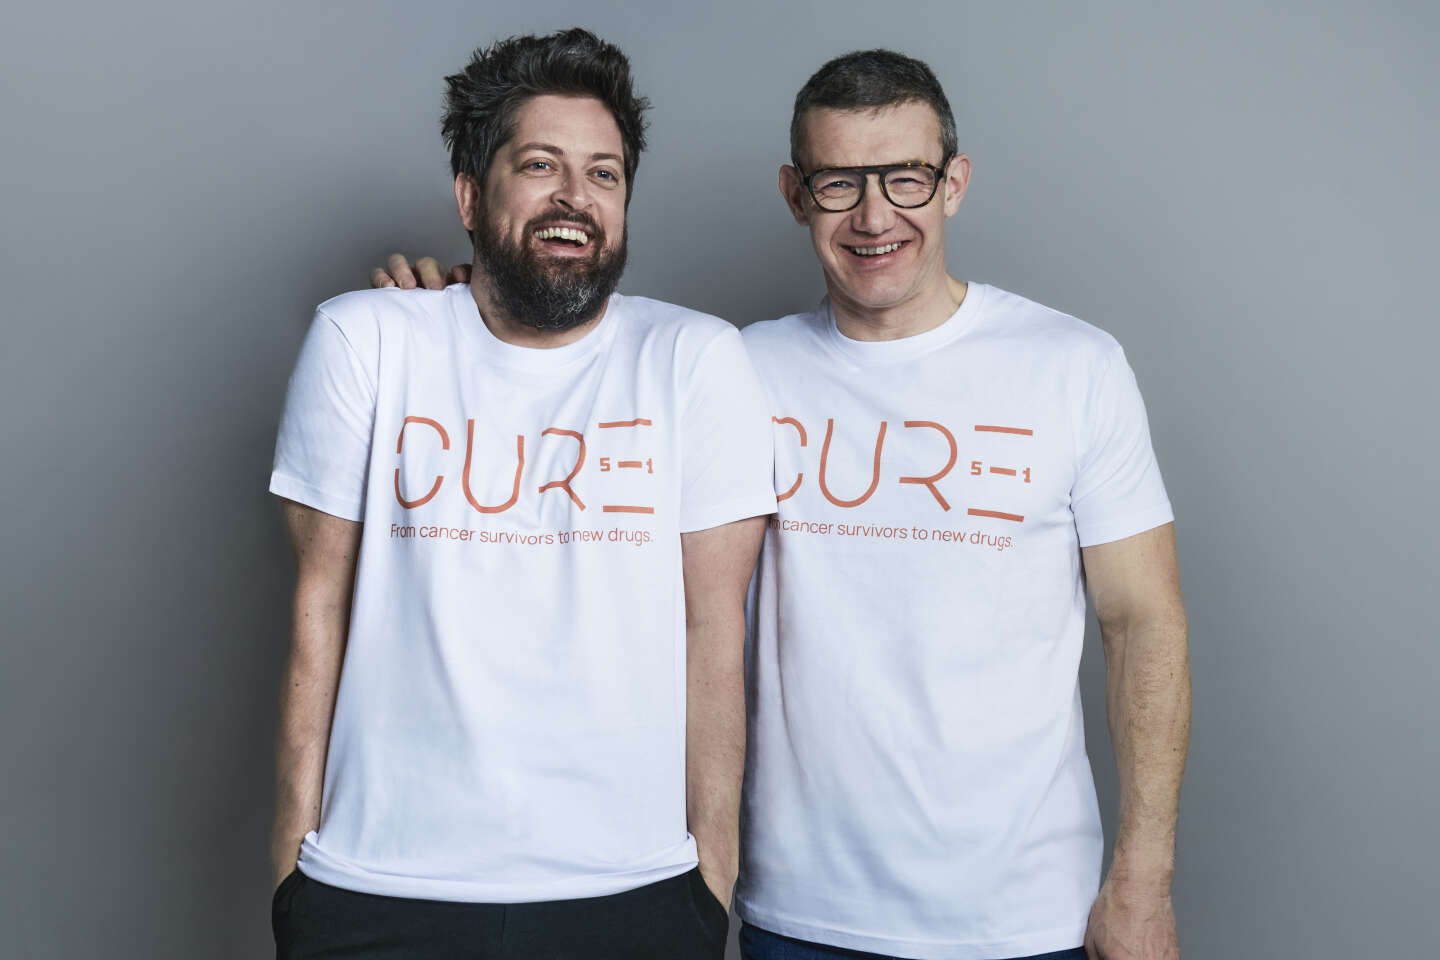 Cure51 raises 15 million euros to unravel the secrets of 'cancer miracles'